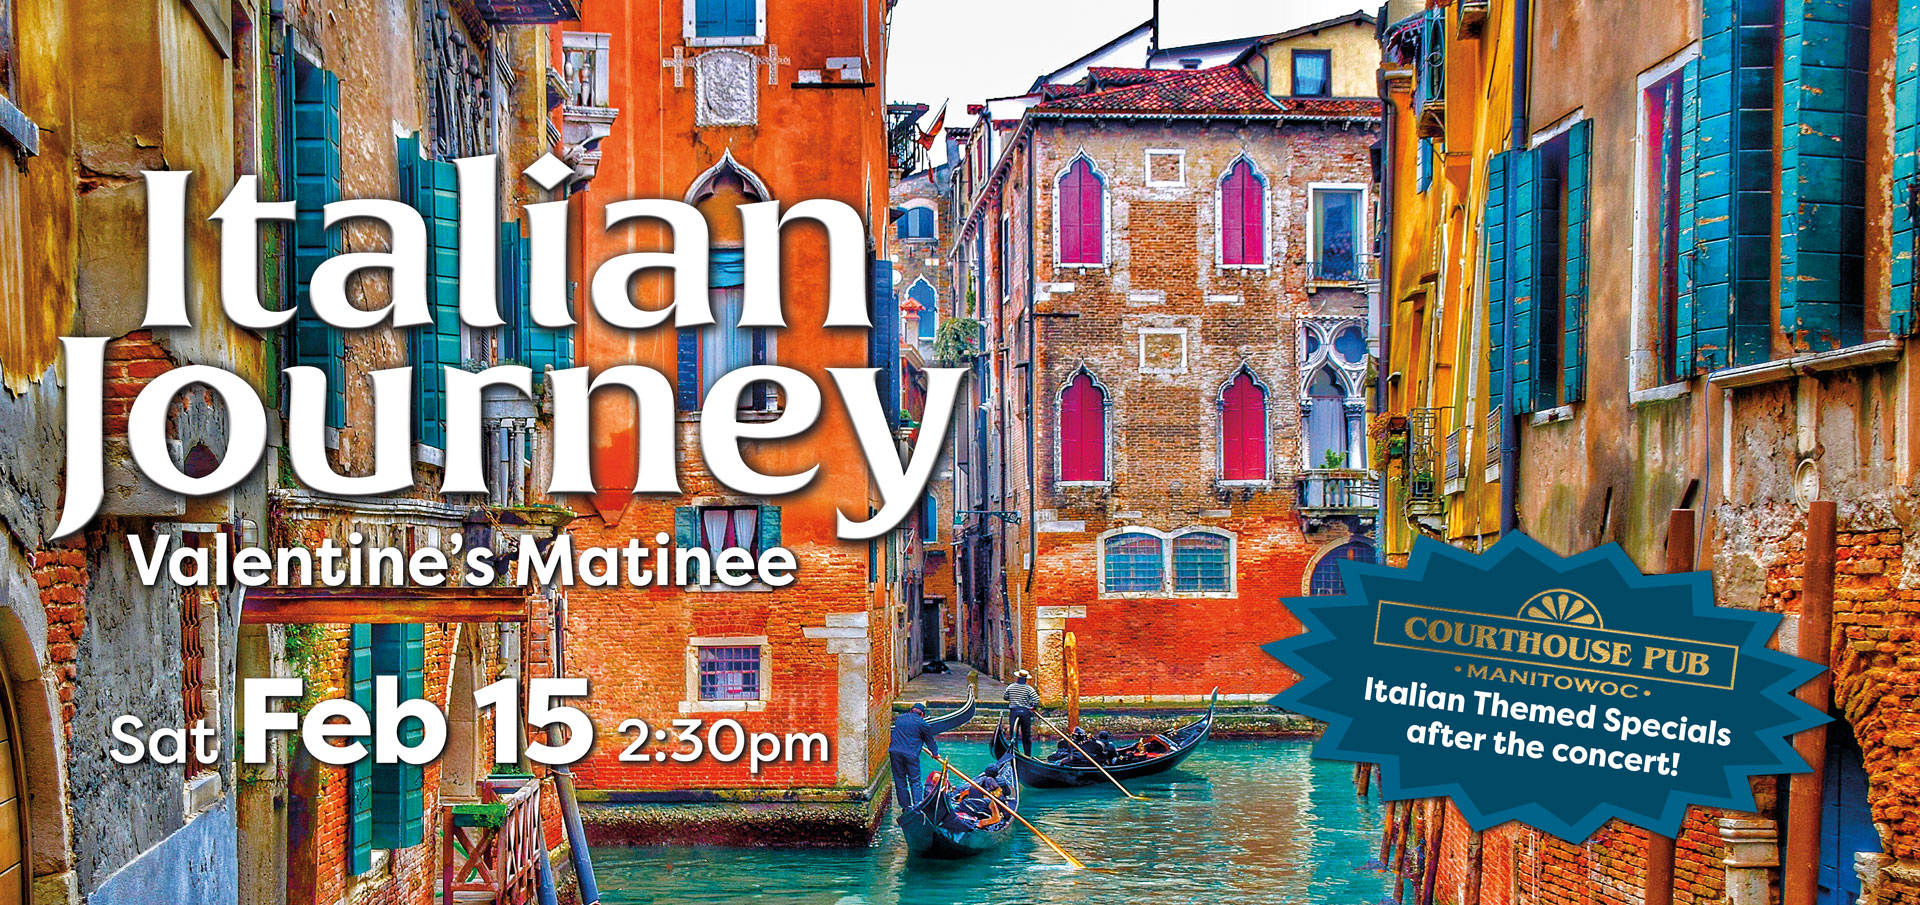 a poster with a scene of colorful buildings and a canal with gondoliers in Venice. There is text on the poster which is all available below this image.